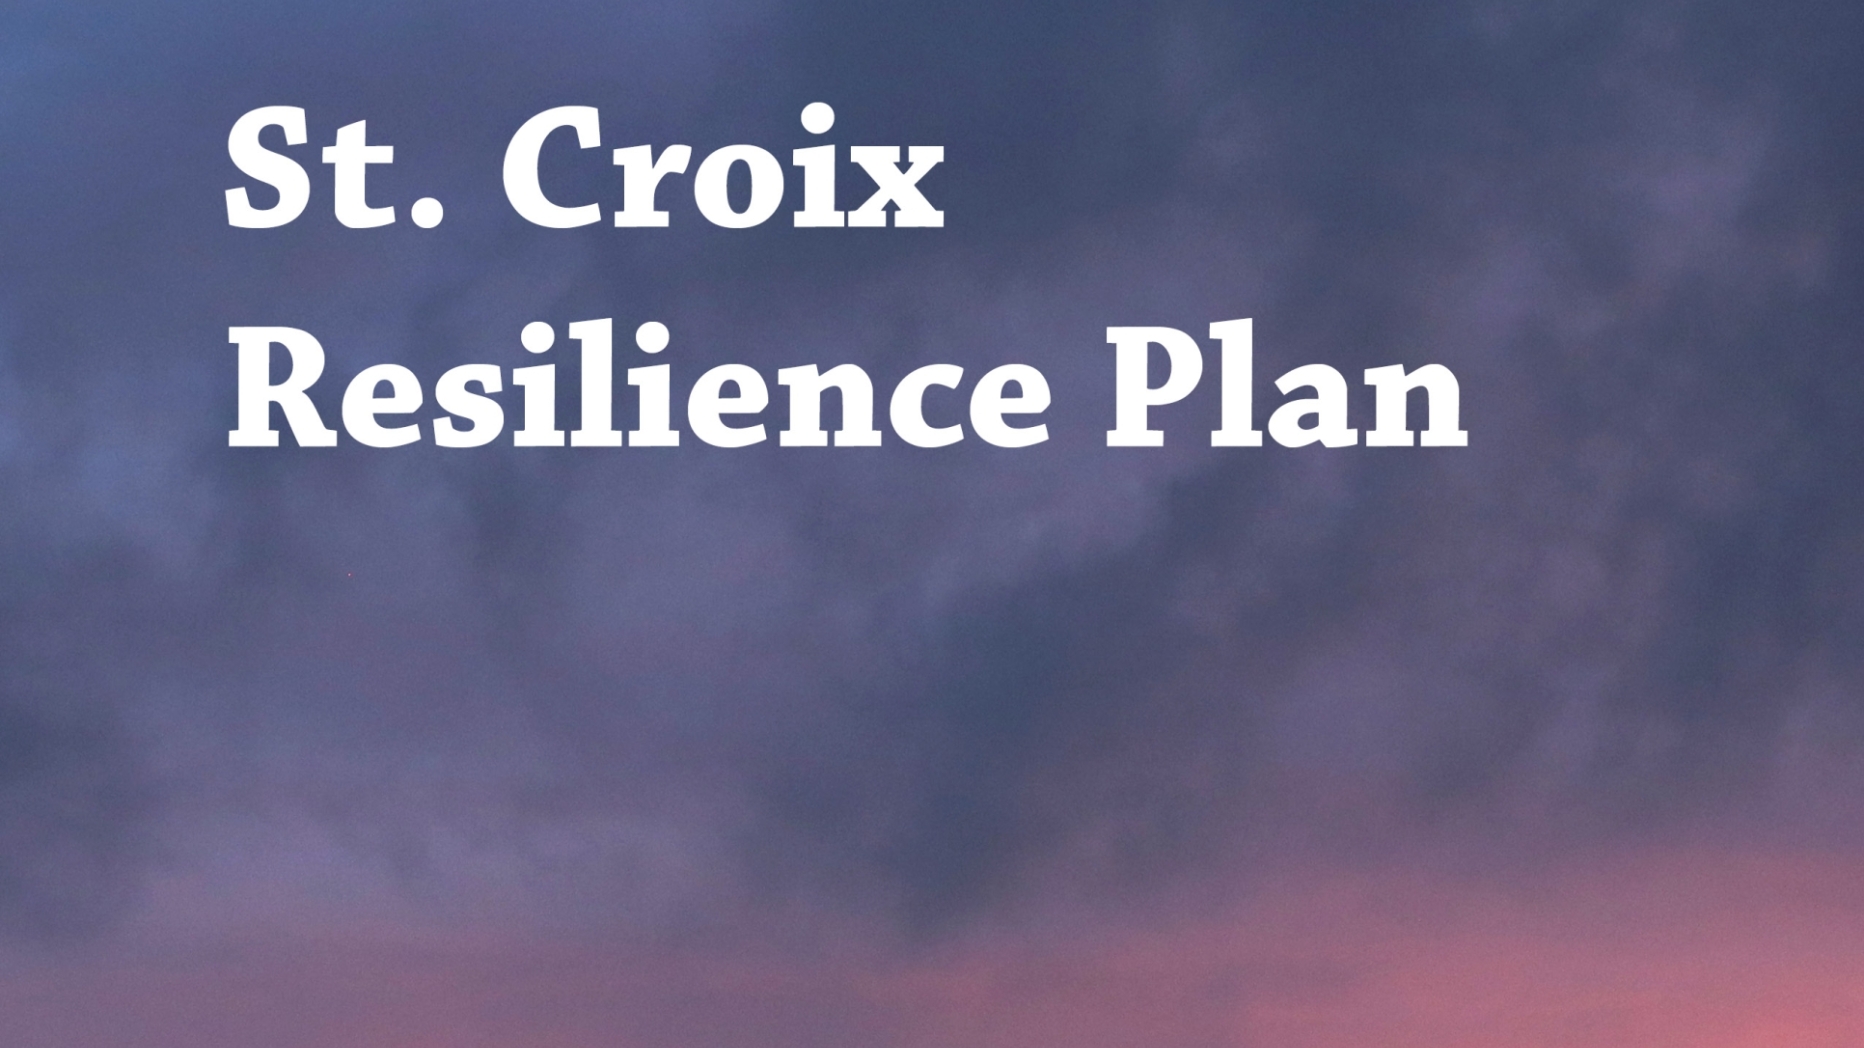 St. Croix Resilience Plan studio report cover